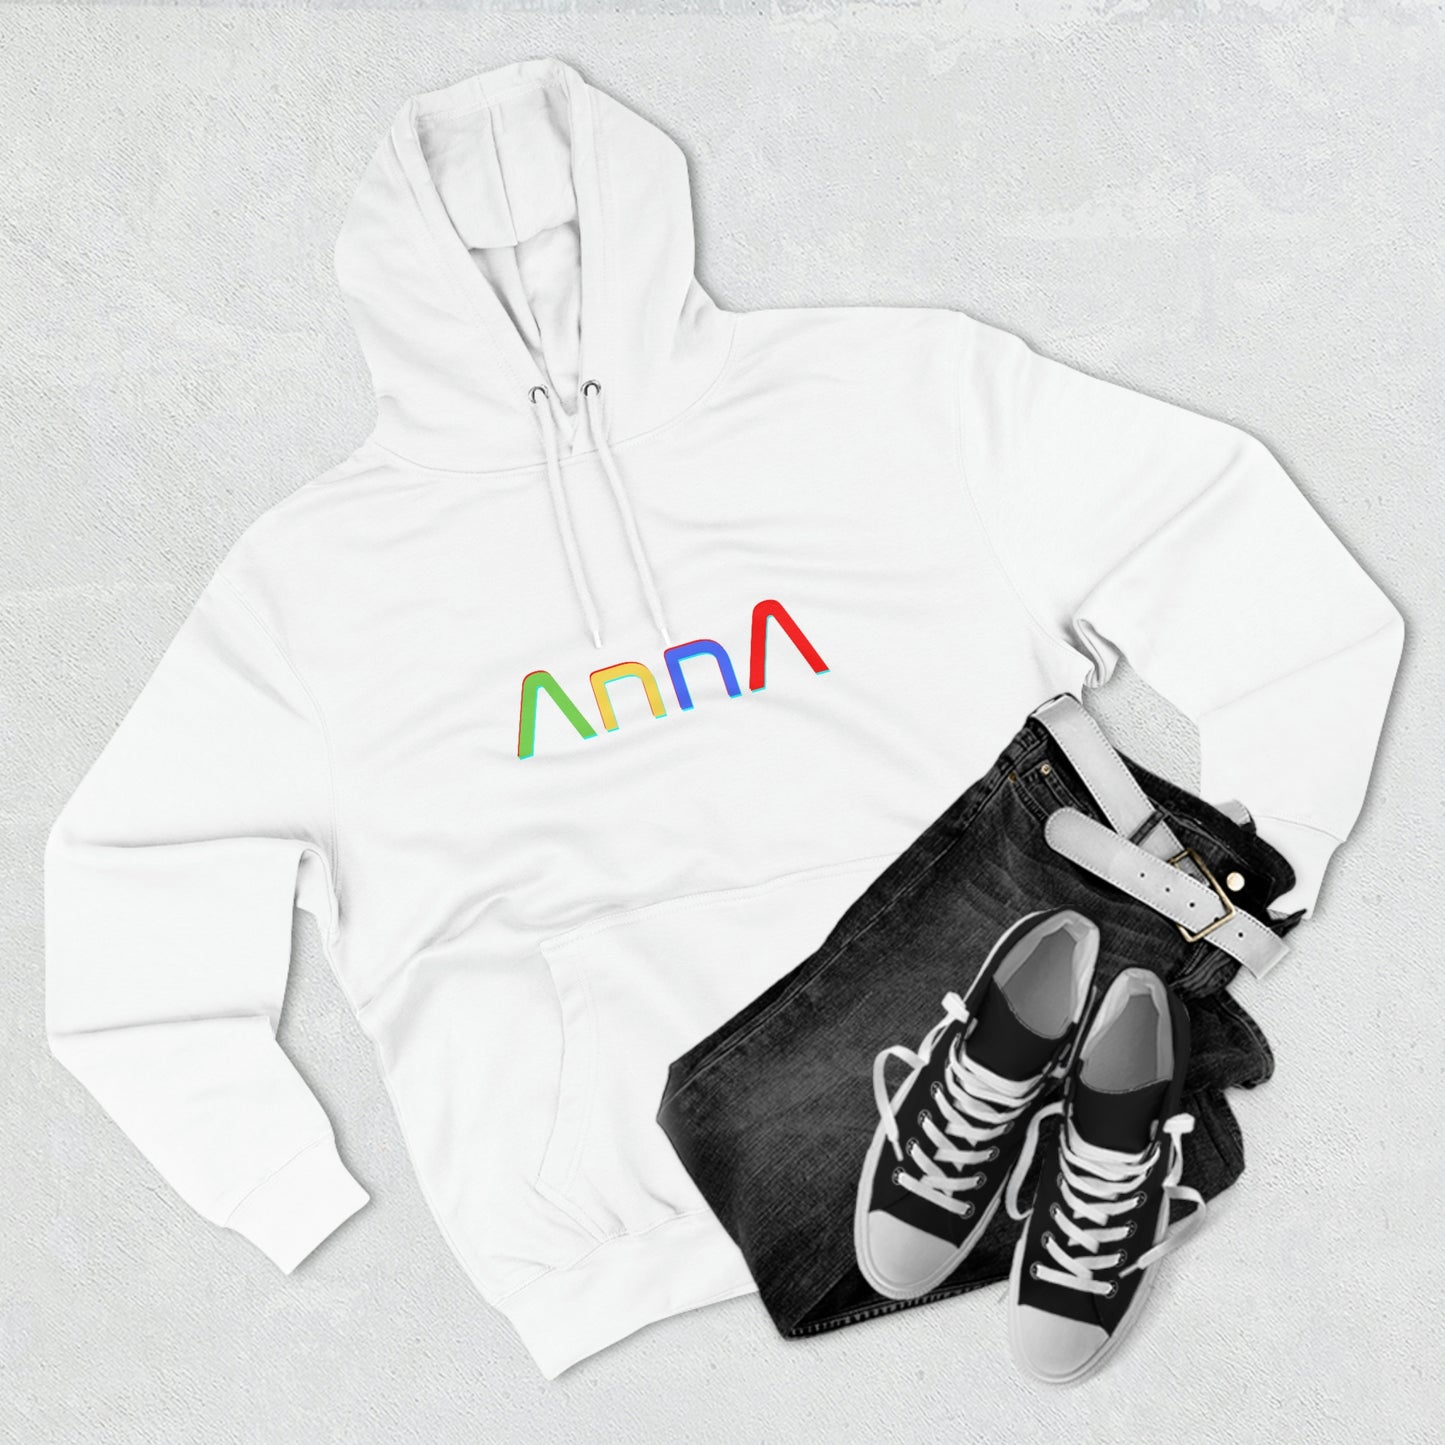 Copy of Chef Anna Hoodie